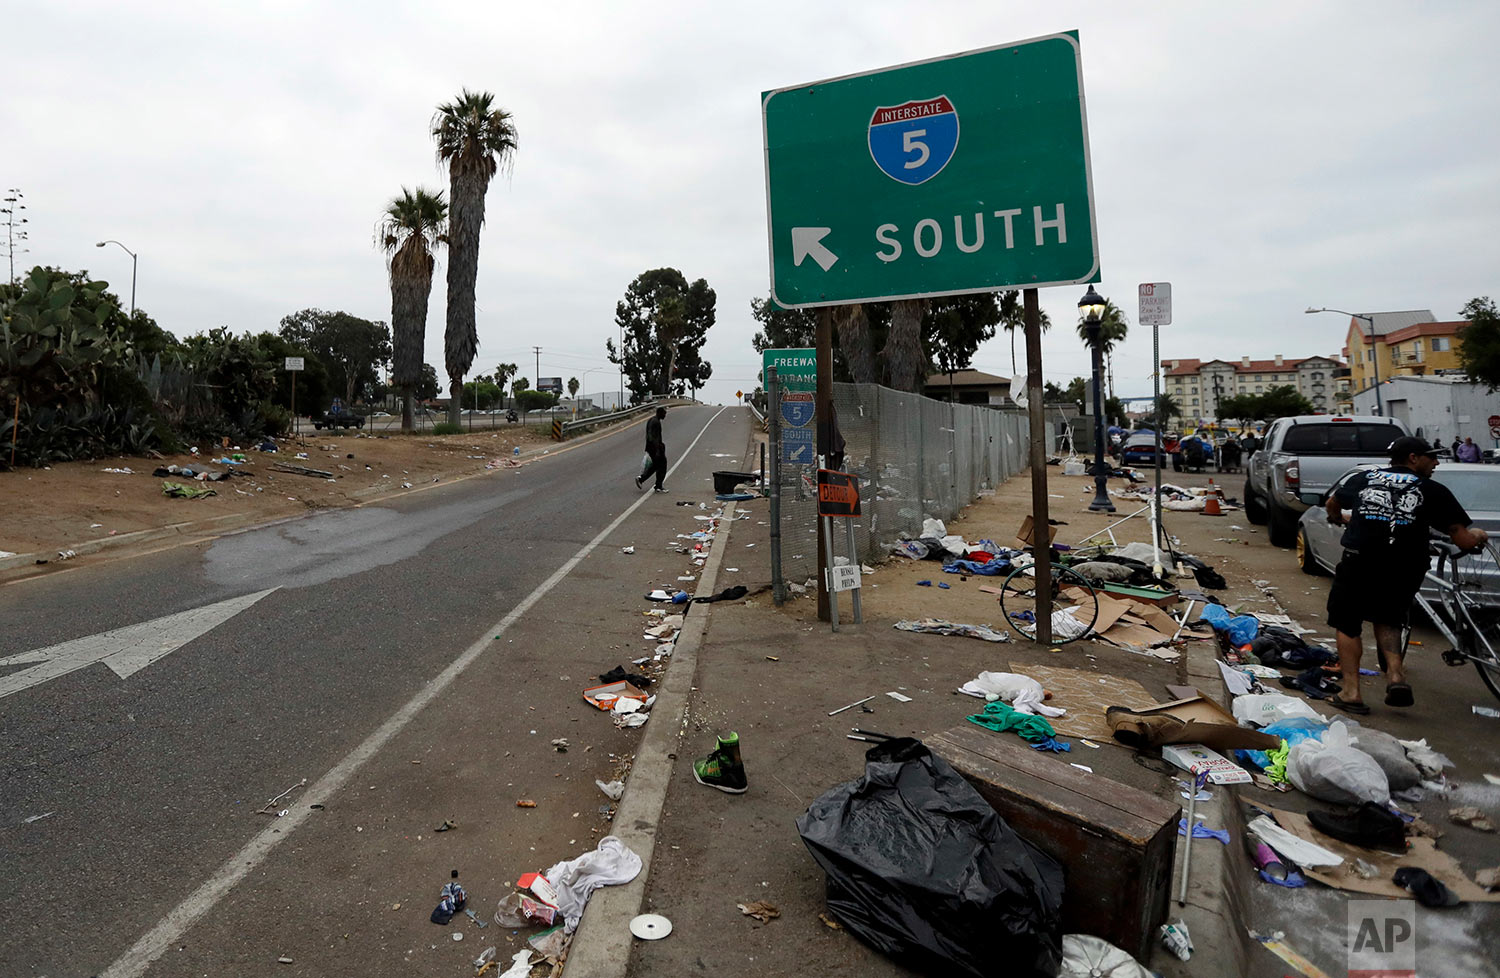  In this Sept. 19, 2017 photo, trash from homeless encampments lines an entrance ramp for Interstate Highway 5 in San Diego. In a place that bills itself as “America’s Finest City,” renowned for its sunny weather, surfing and fish tacos, spiraling real estate values have contributed to spiraling homelessness in San Diego. Most alarmingly, the explosive growth in the number of people living outdoors has contributed to a hepatitis A epidemic. (AP Photo/Gregory Bull) 